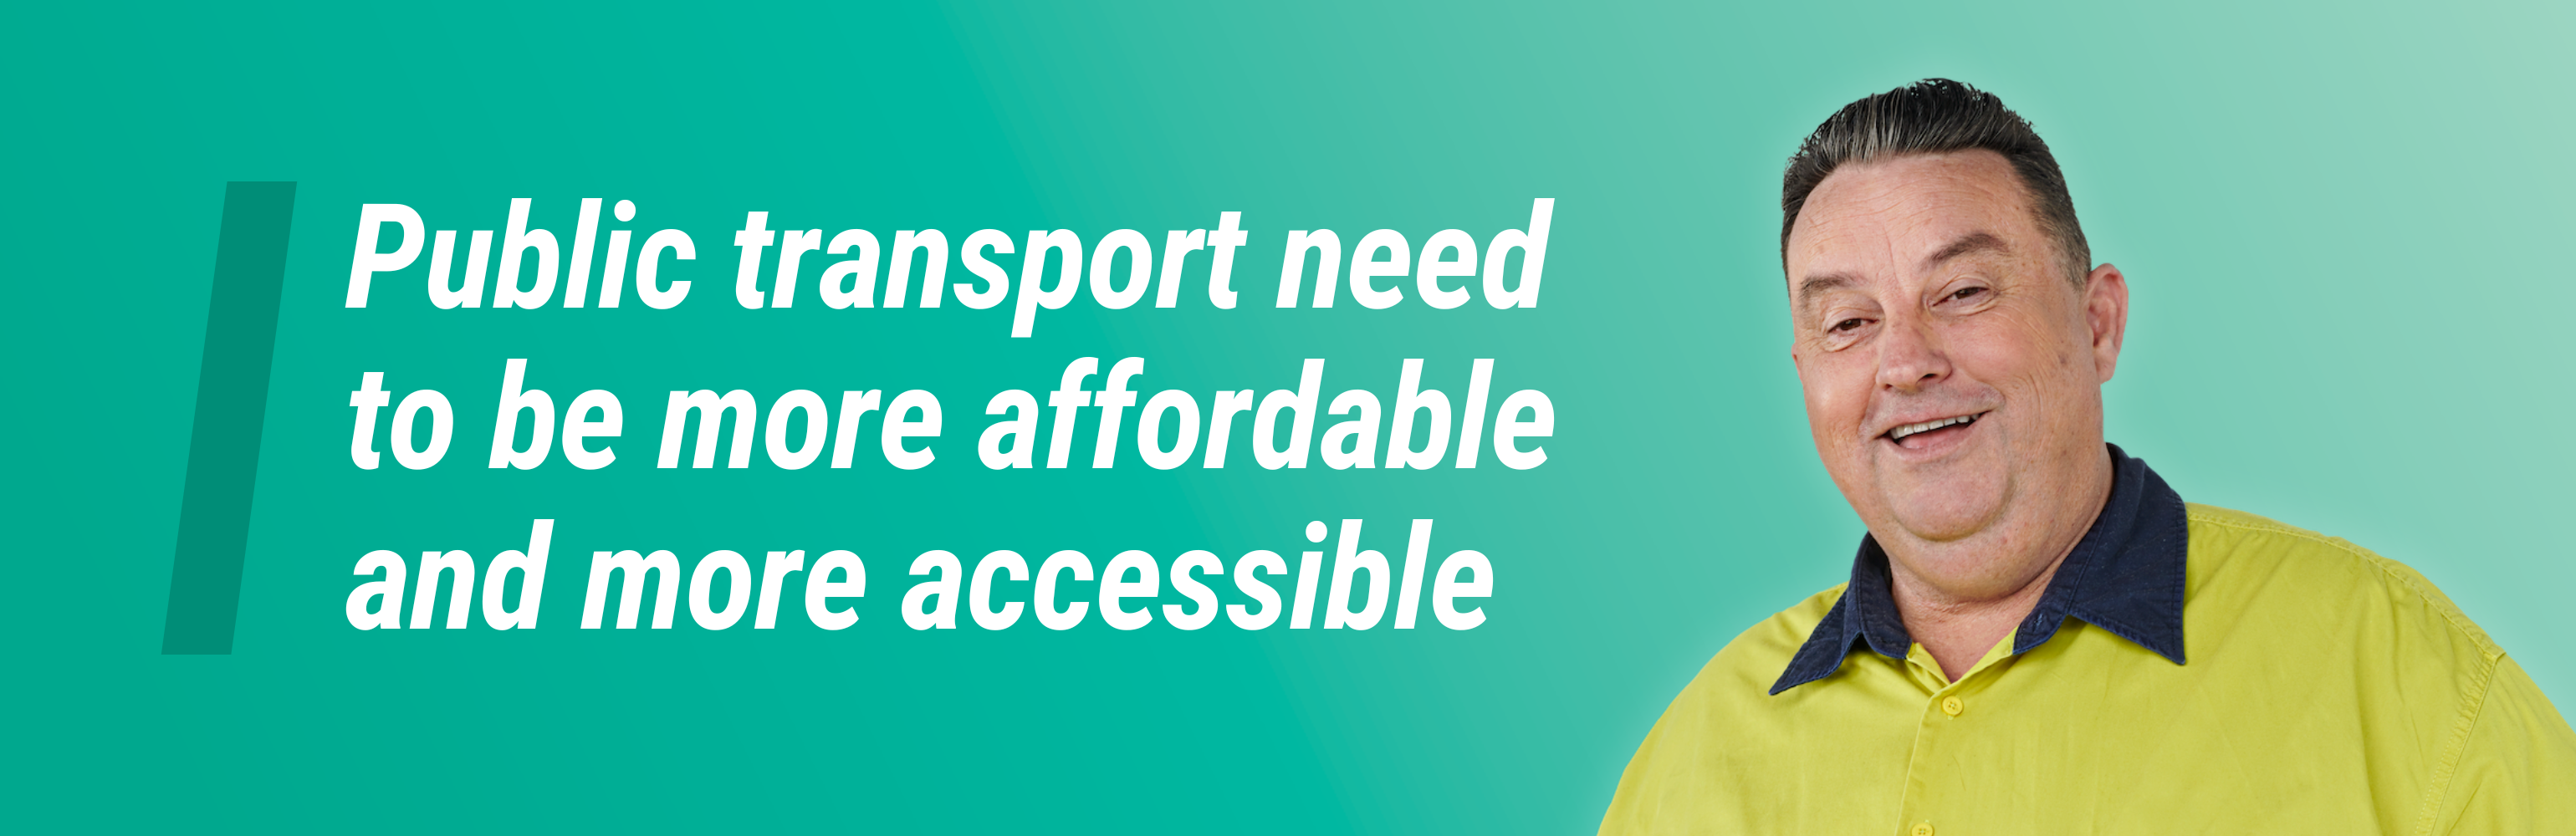 'Public transport need to be more affordable and more accessible'